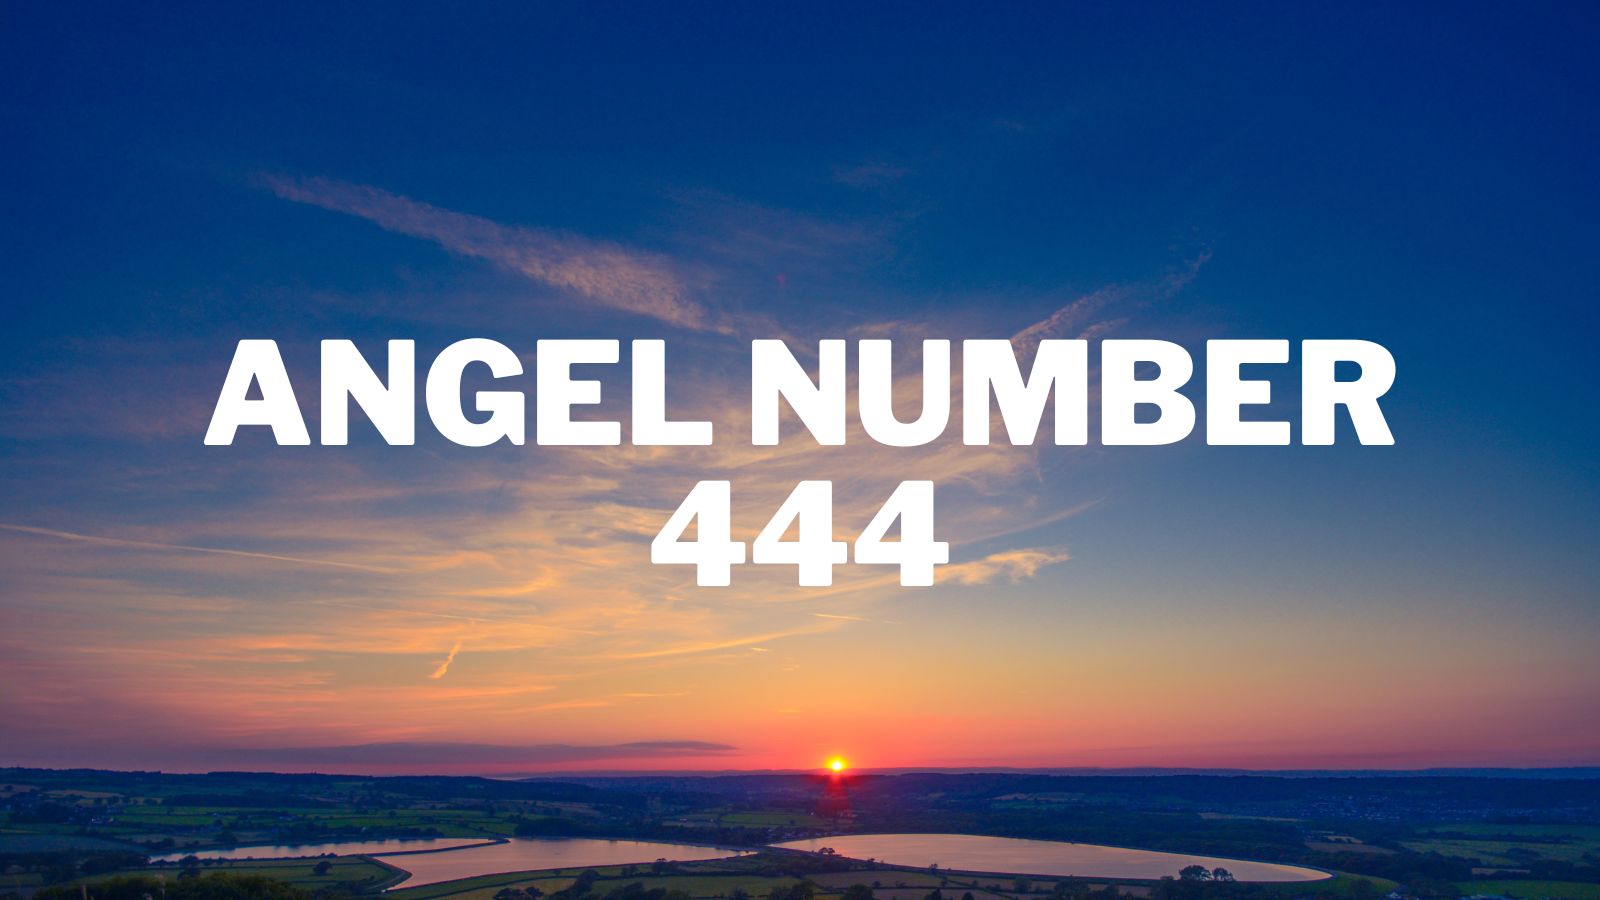 Angel Number 444 Meanings and Symbolism